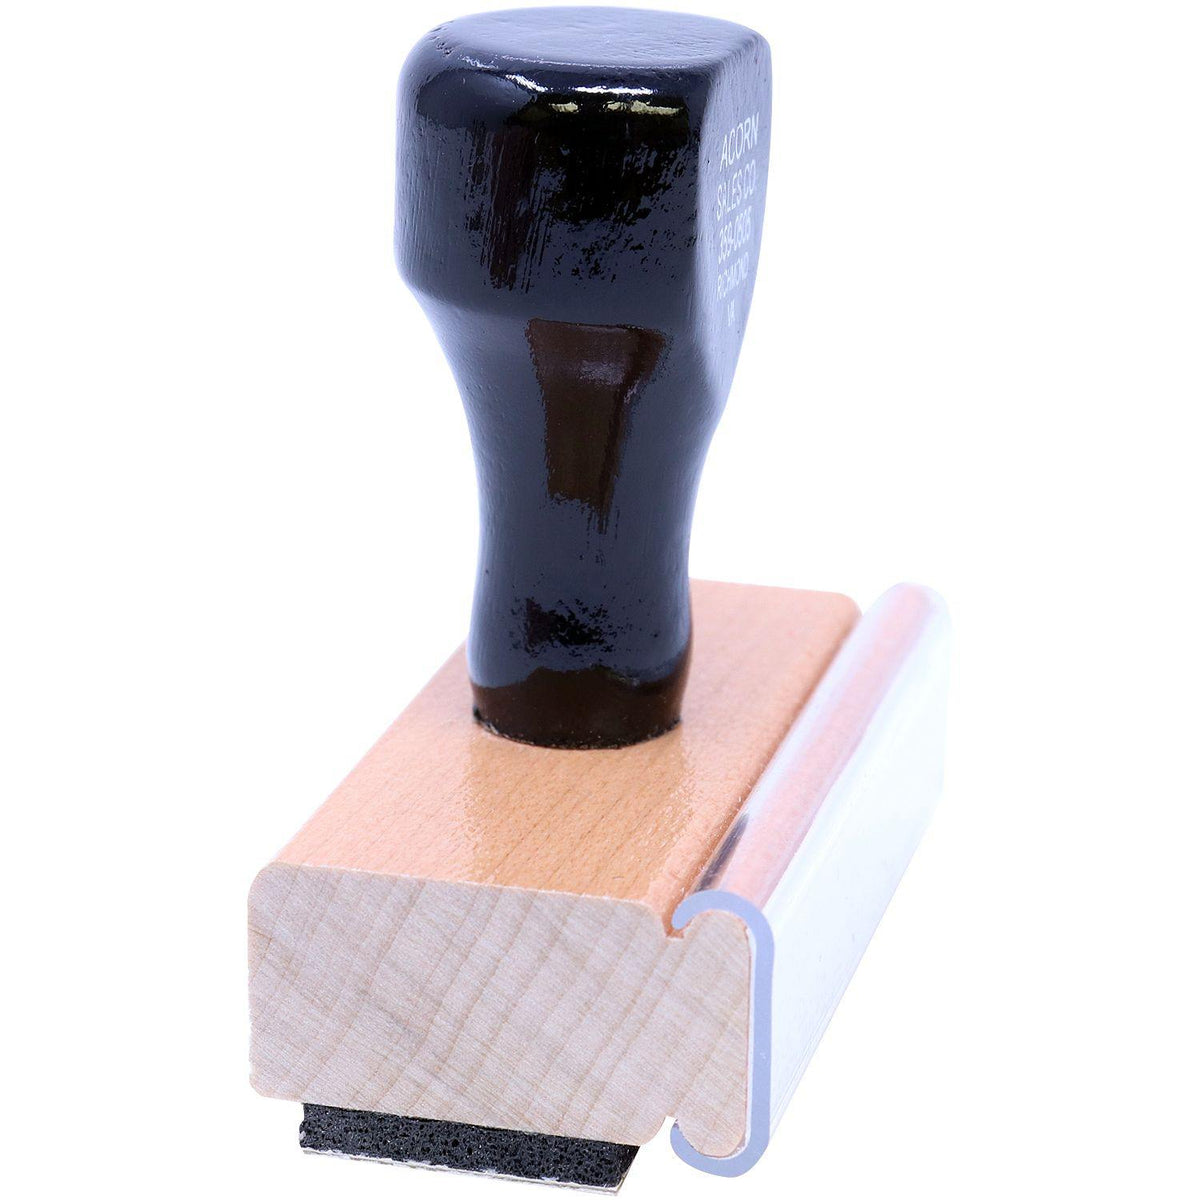 Side View of Health Alert Rubber Stamp at an Angle